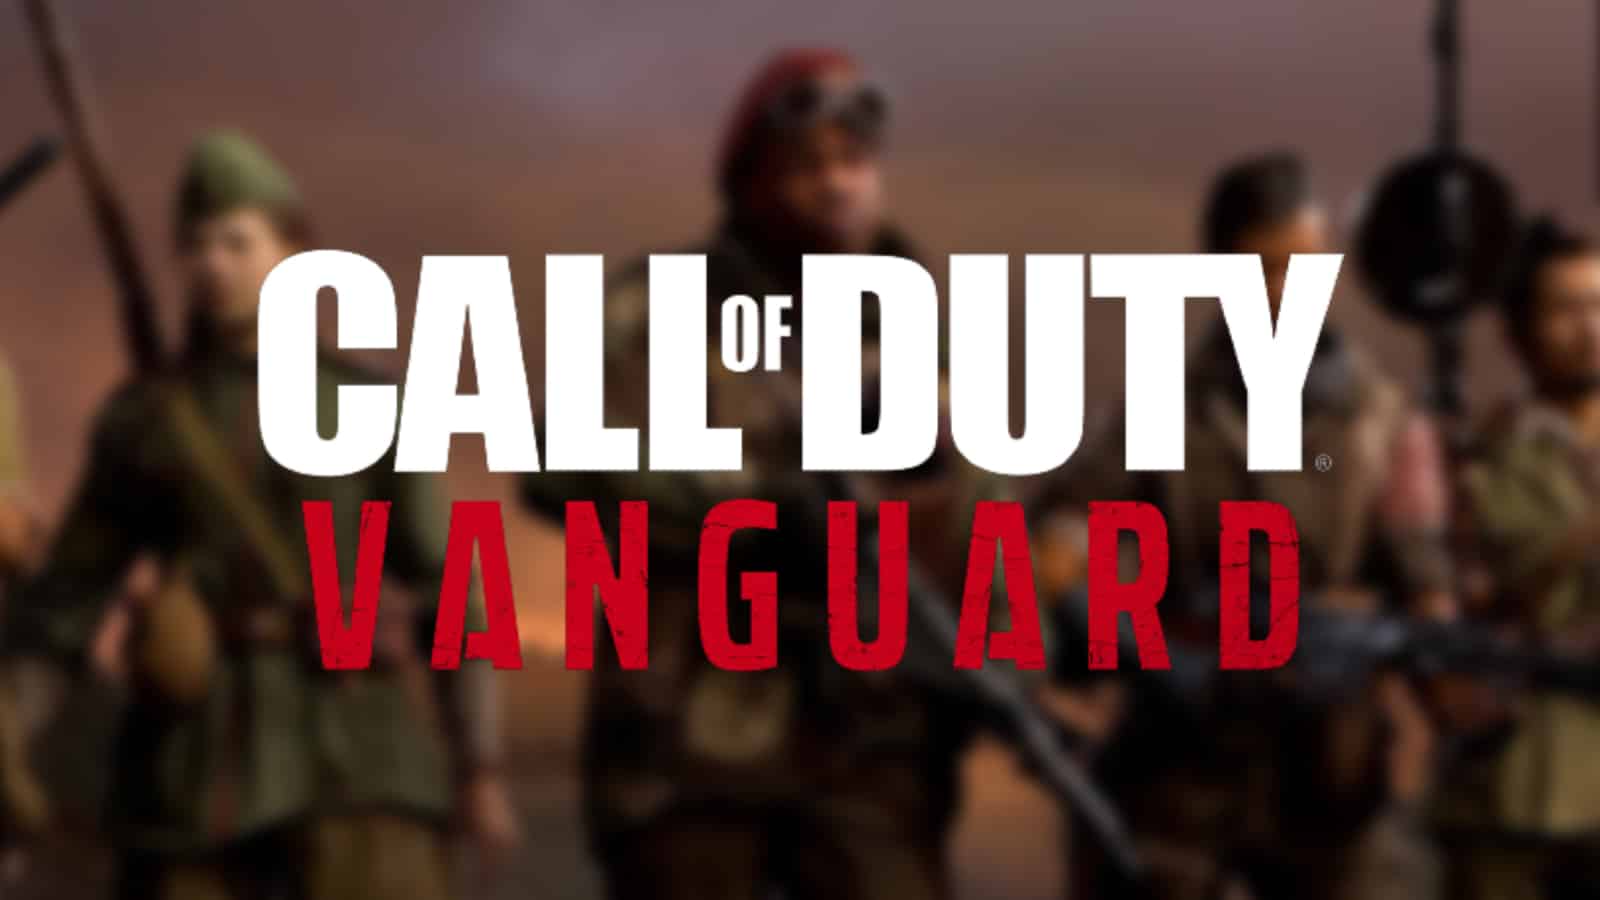 CoD Vanguard's Ranked mode plans revealed for 2022